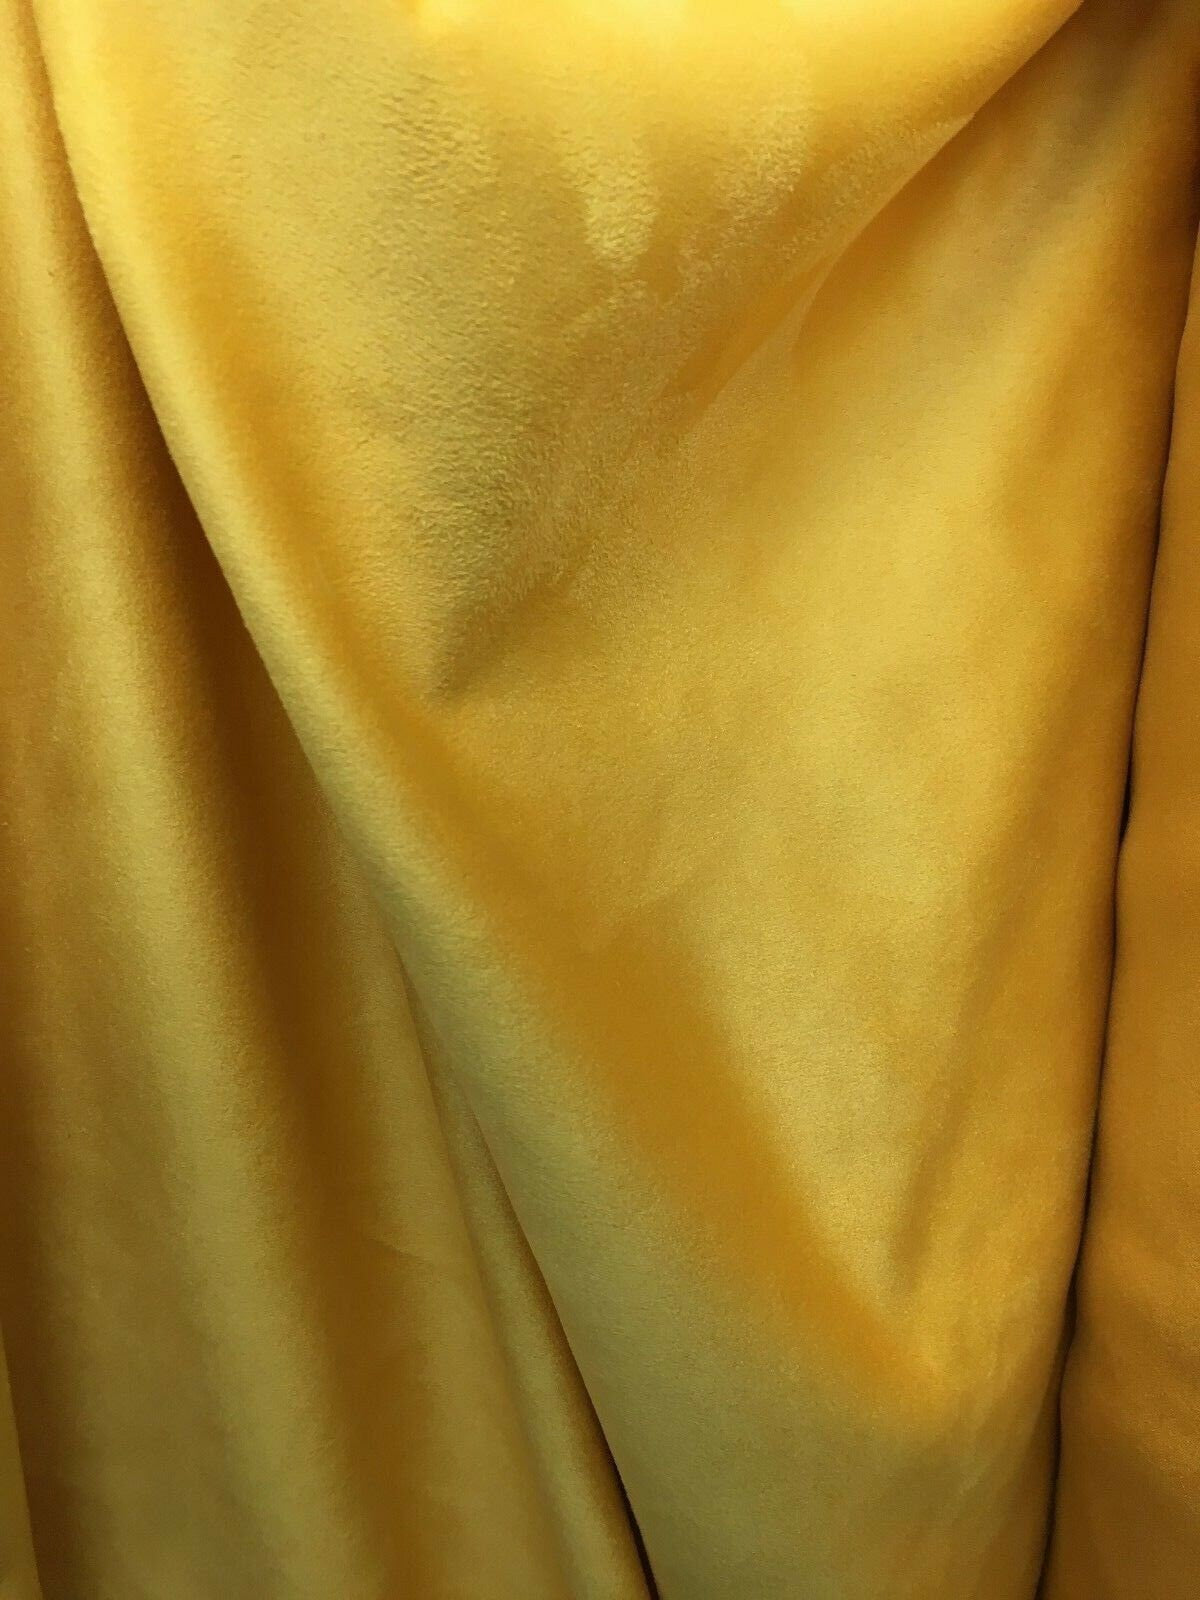 GOLDEN YELLOW Solid Faux Suede Upholstery Drapery Fabric (54 in.) Sold By The Yard